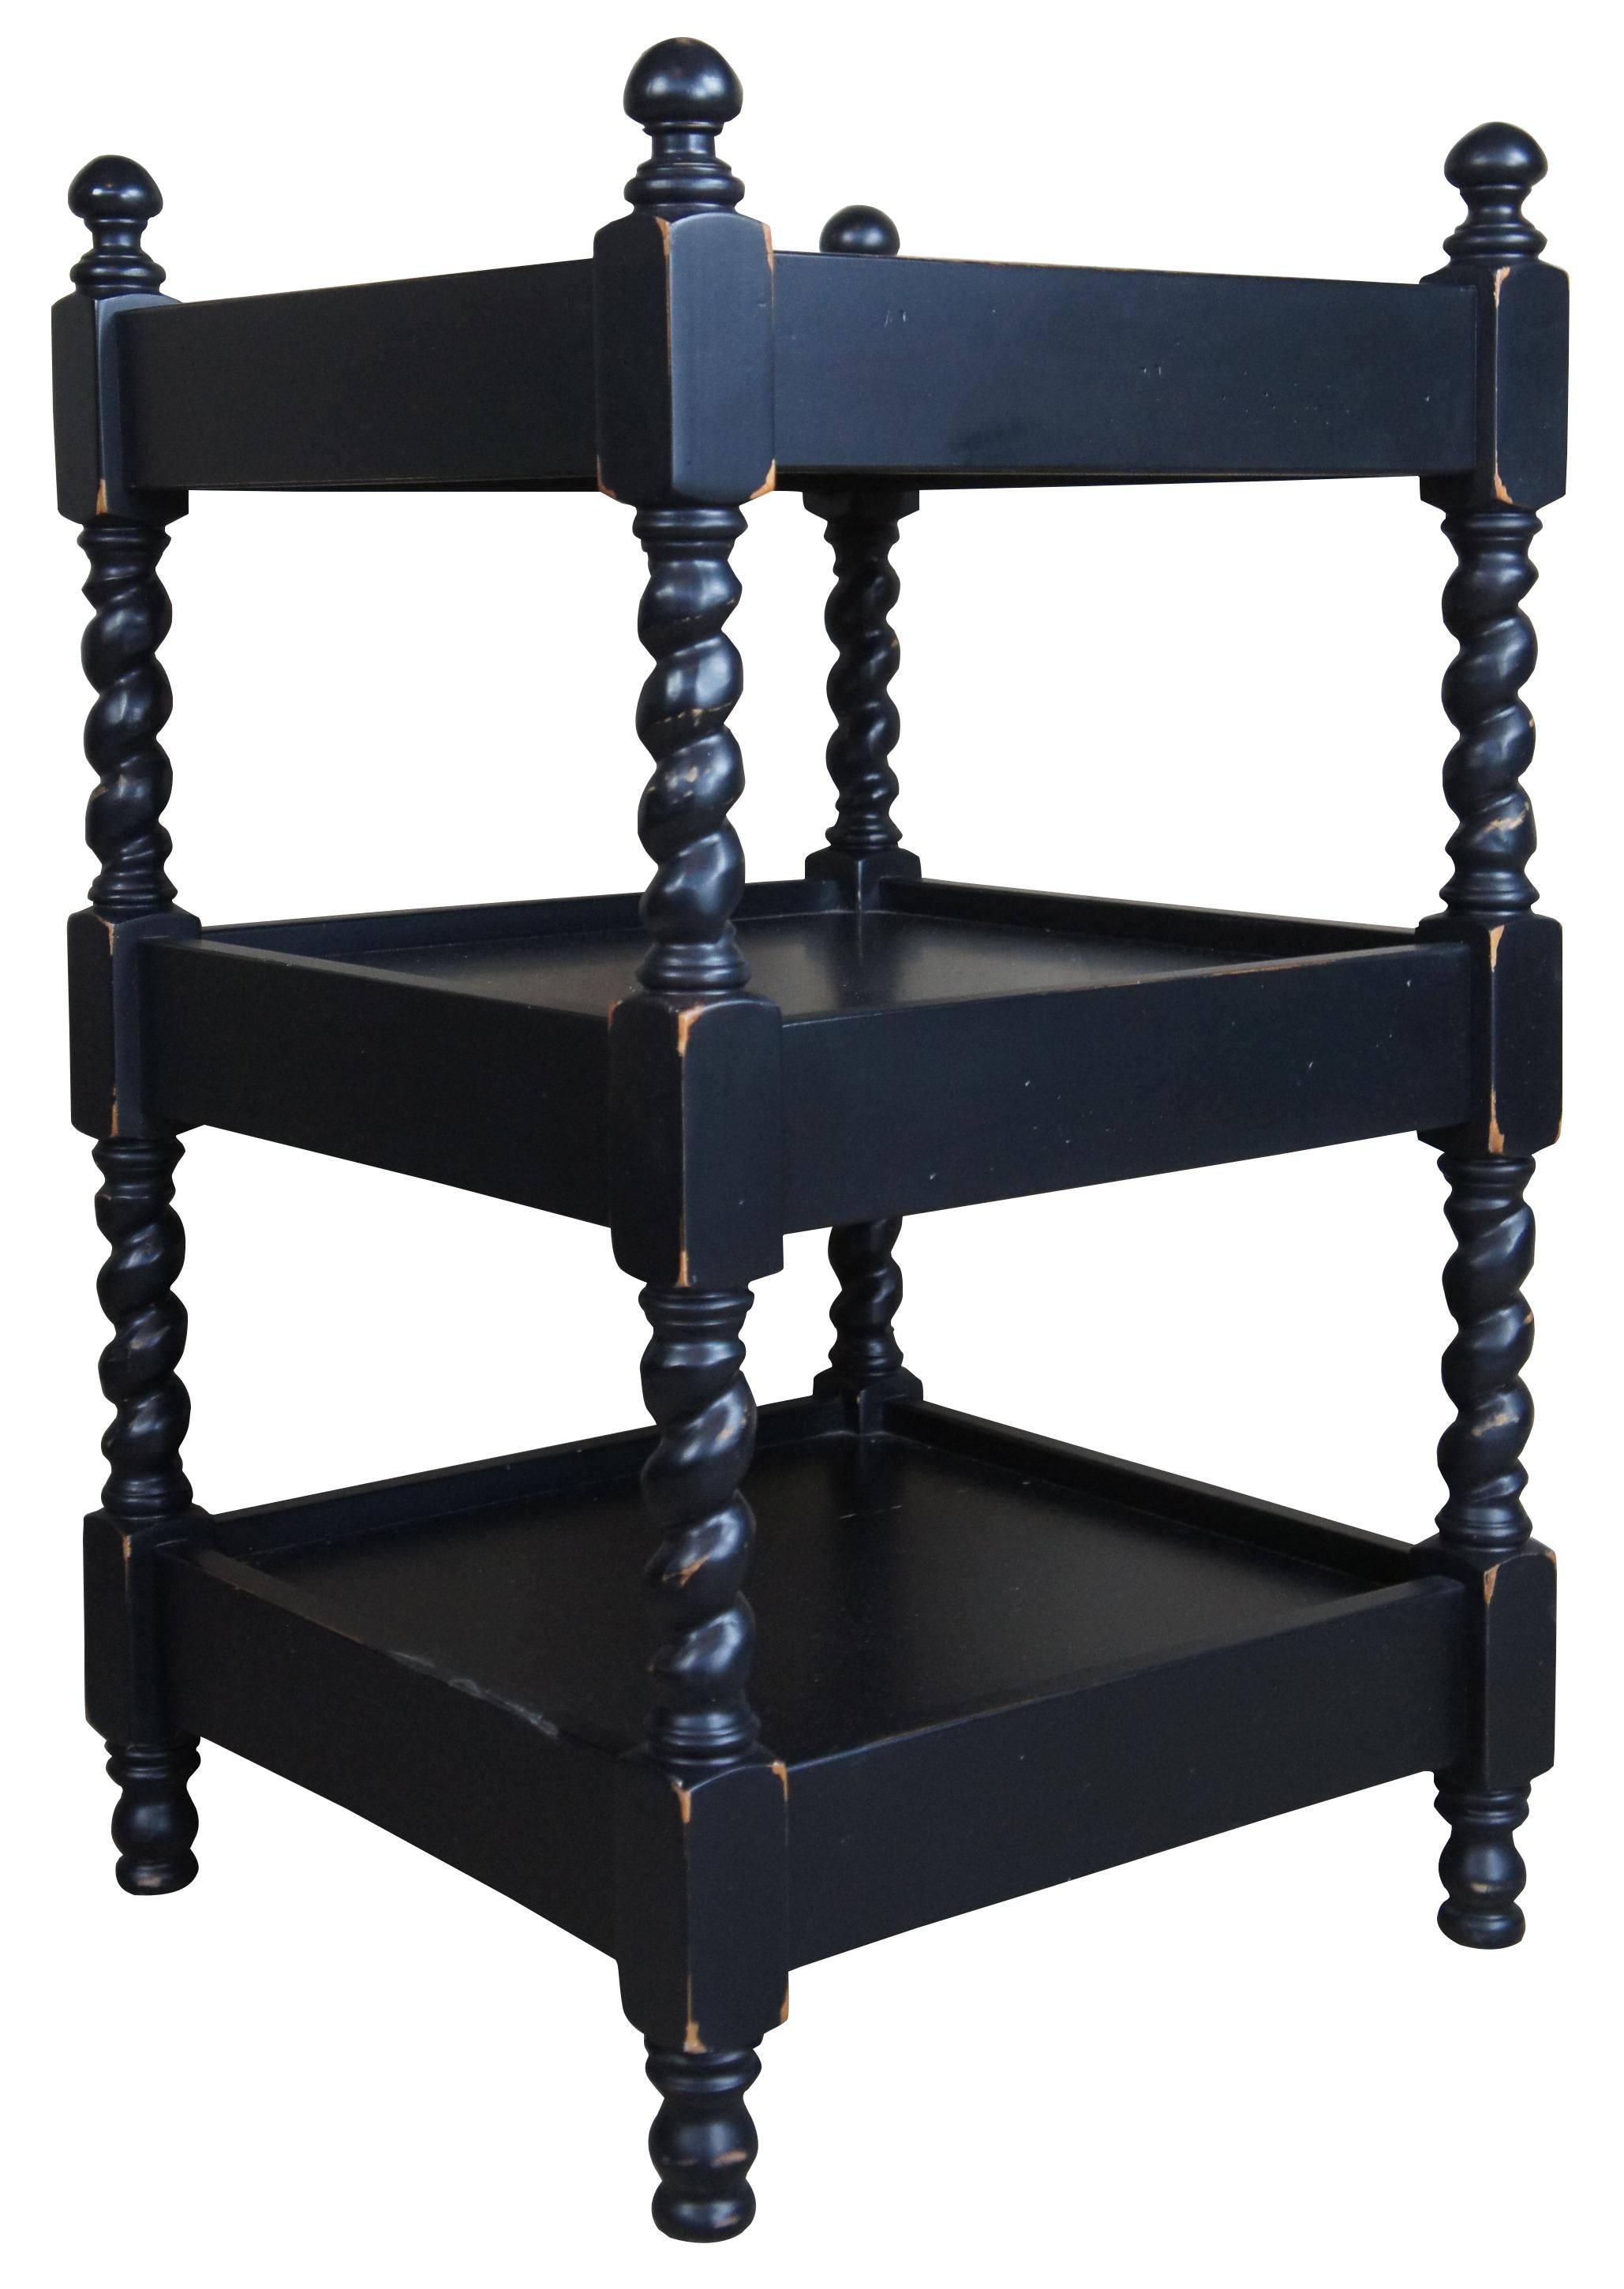 A quaint set of barley twist end tables. Features a 3 tier design with inset tops and a distressed finish. Drawing inspiration from Louis XIII and English styling. Measure: 30